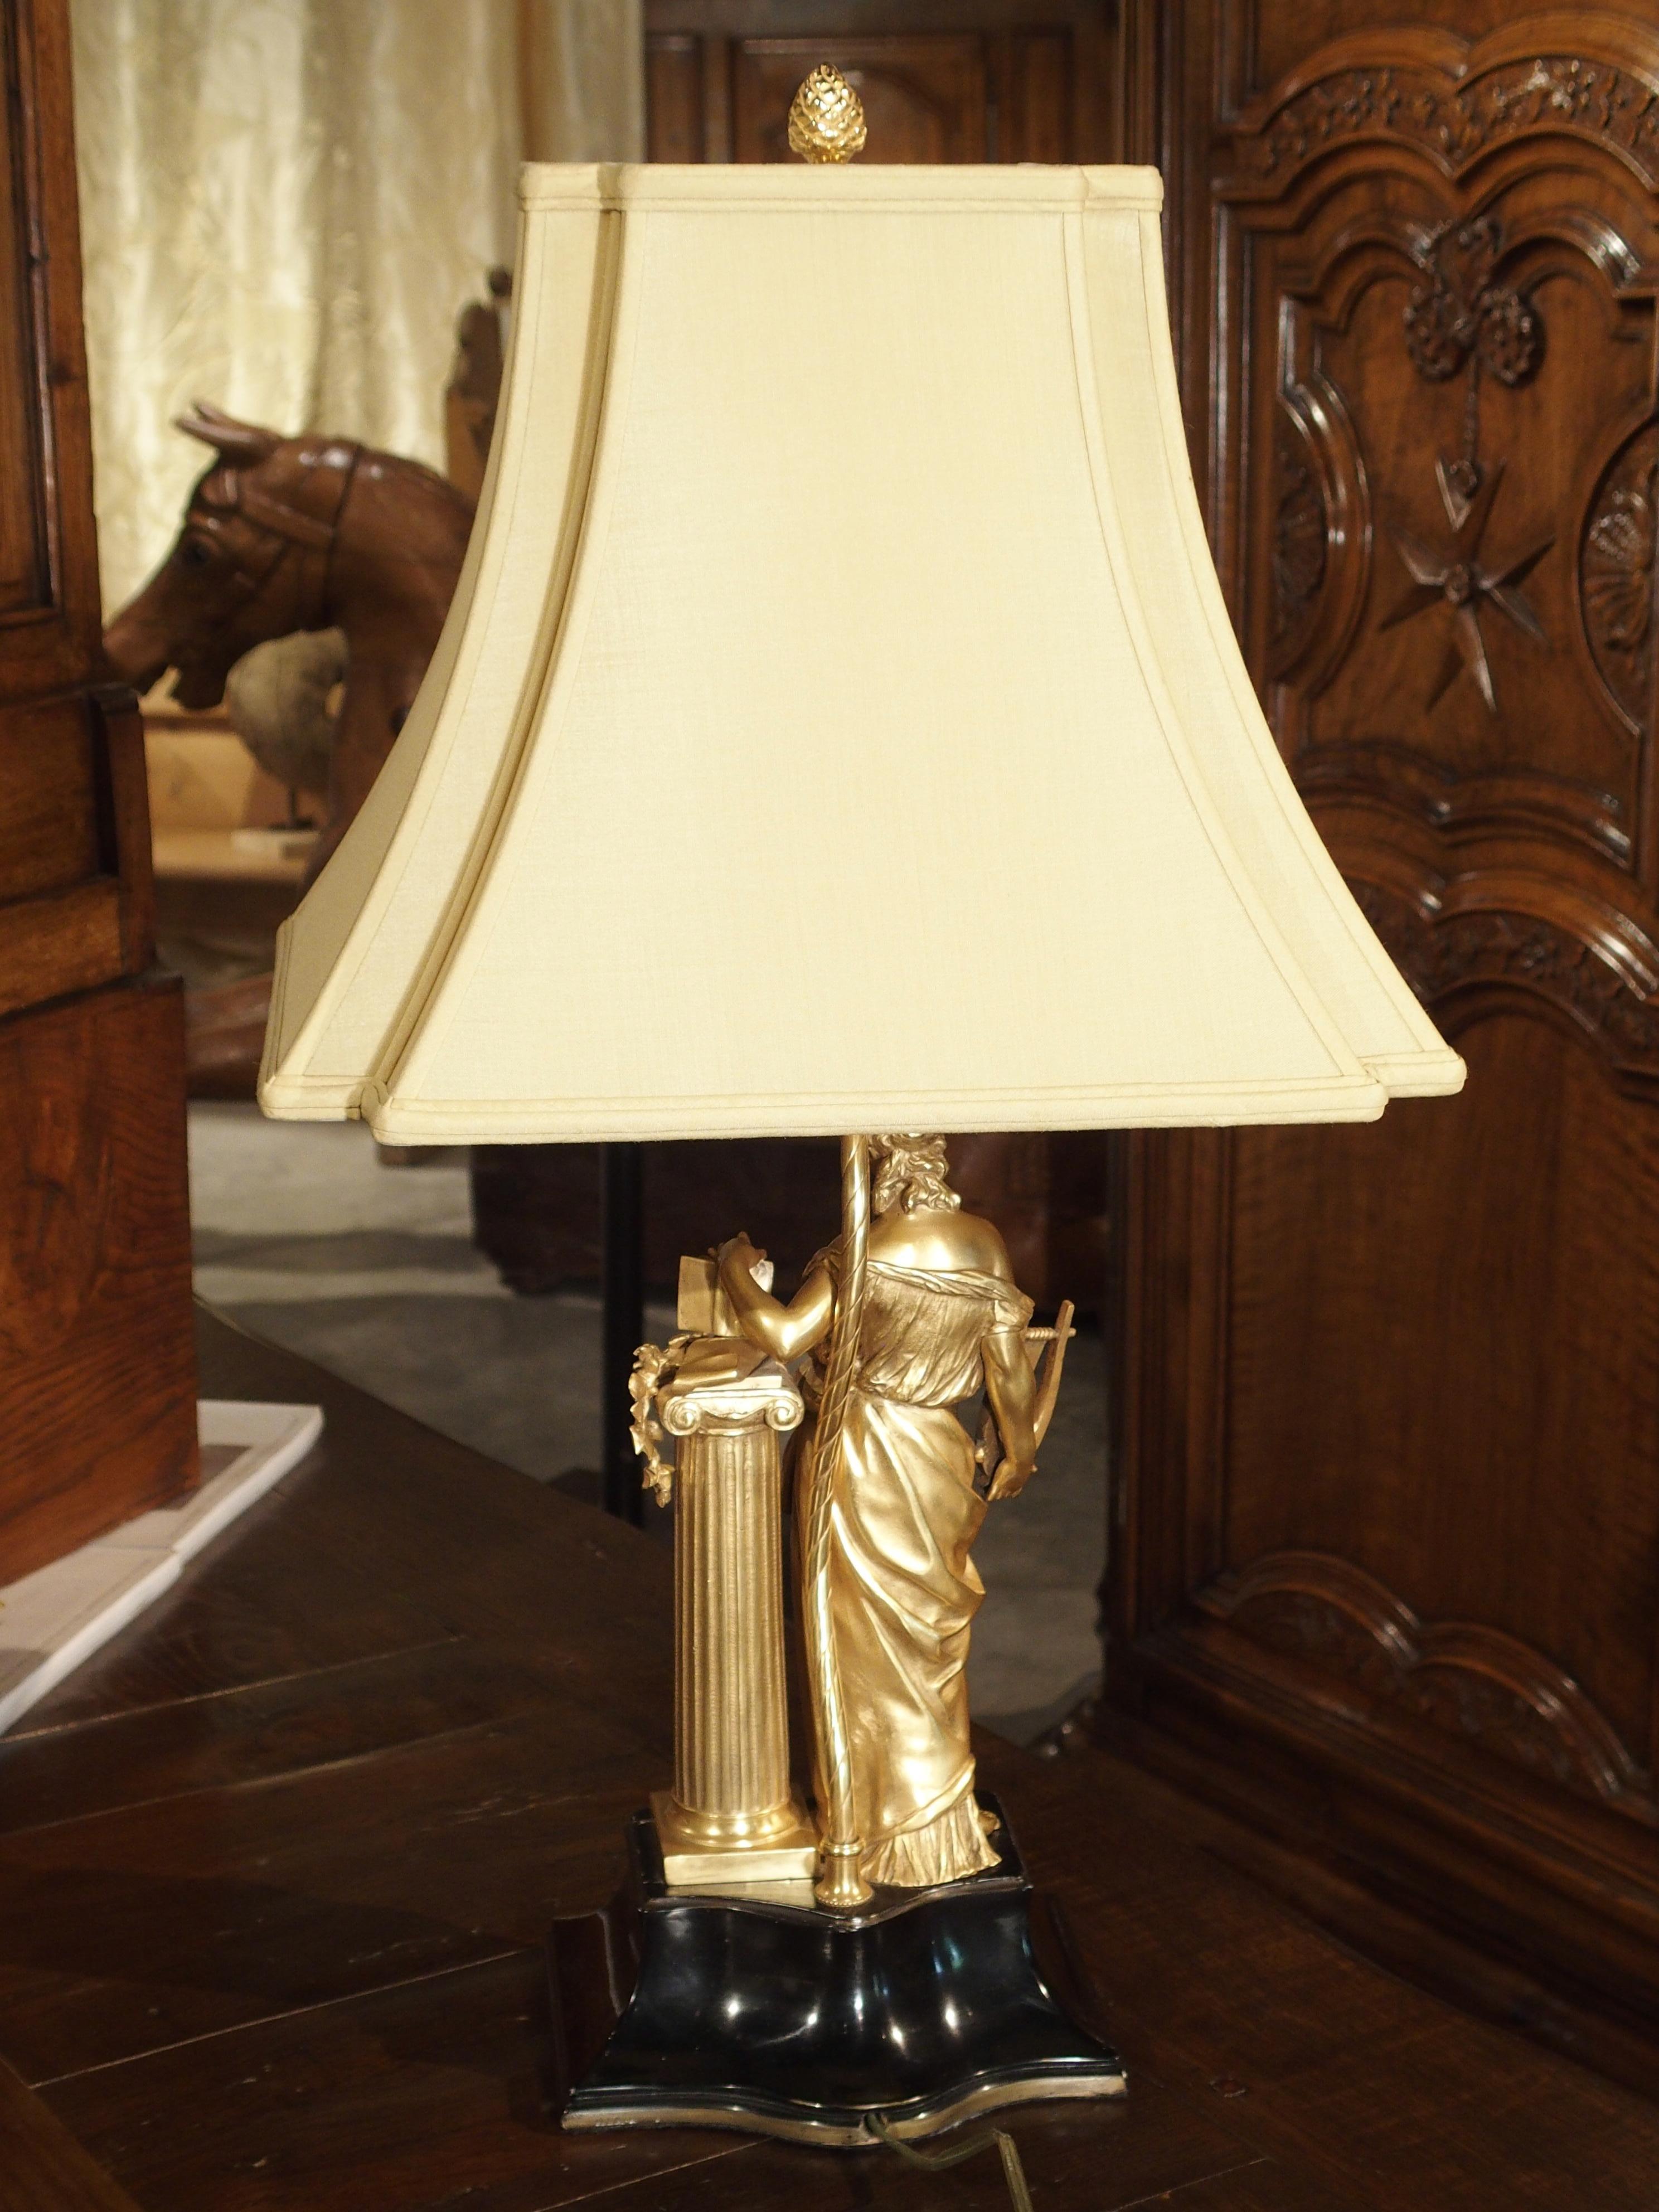 Antique French Gilt Bronze Table Lamp, Signed Moreau, Late 19th Century For Sale 11